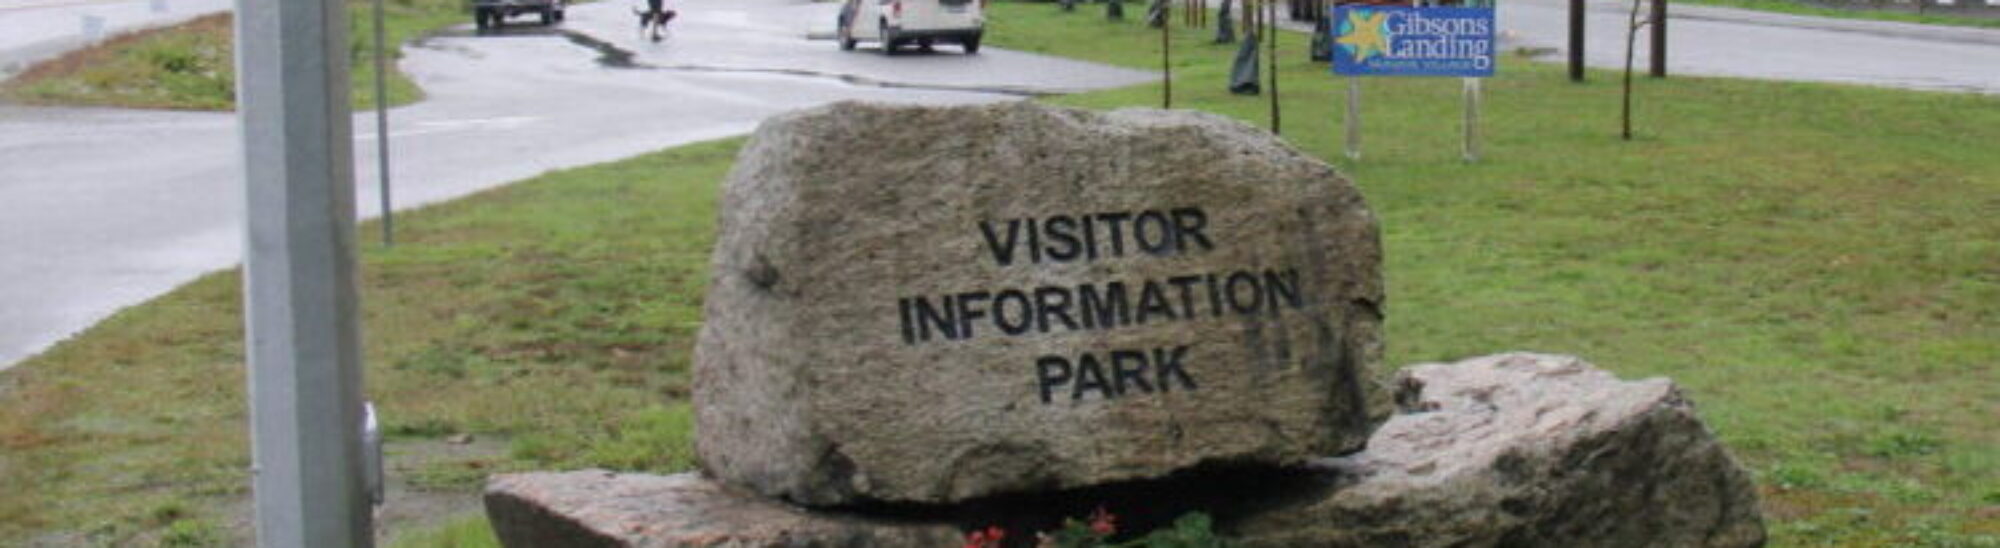 Visitor Information Park Celebrates 10 Years!